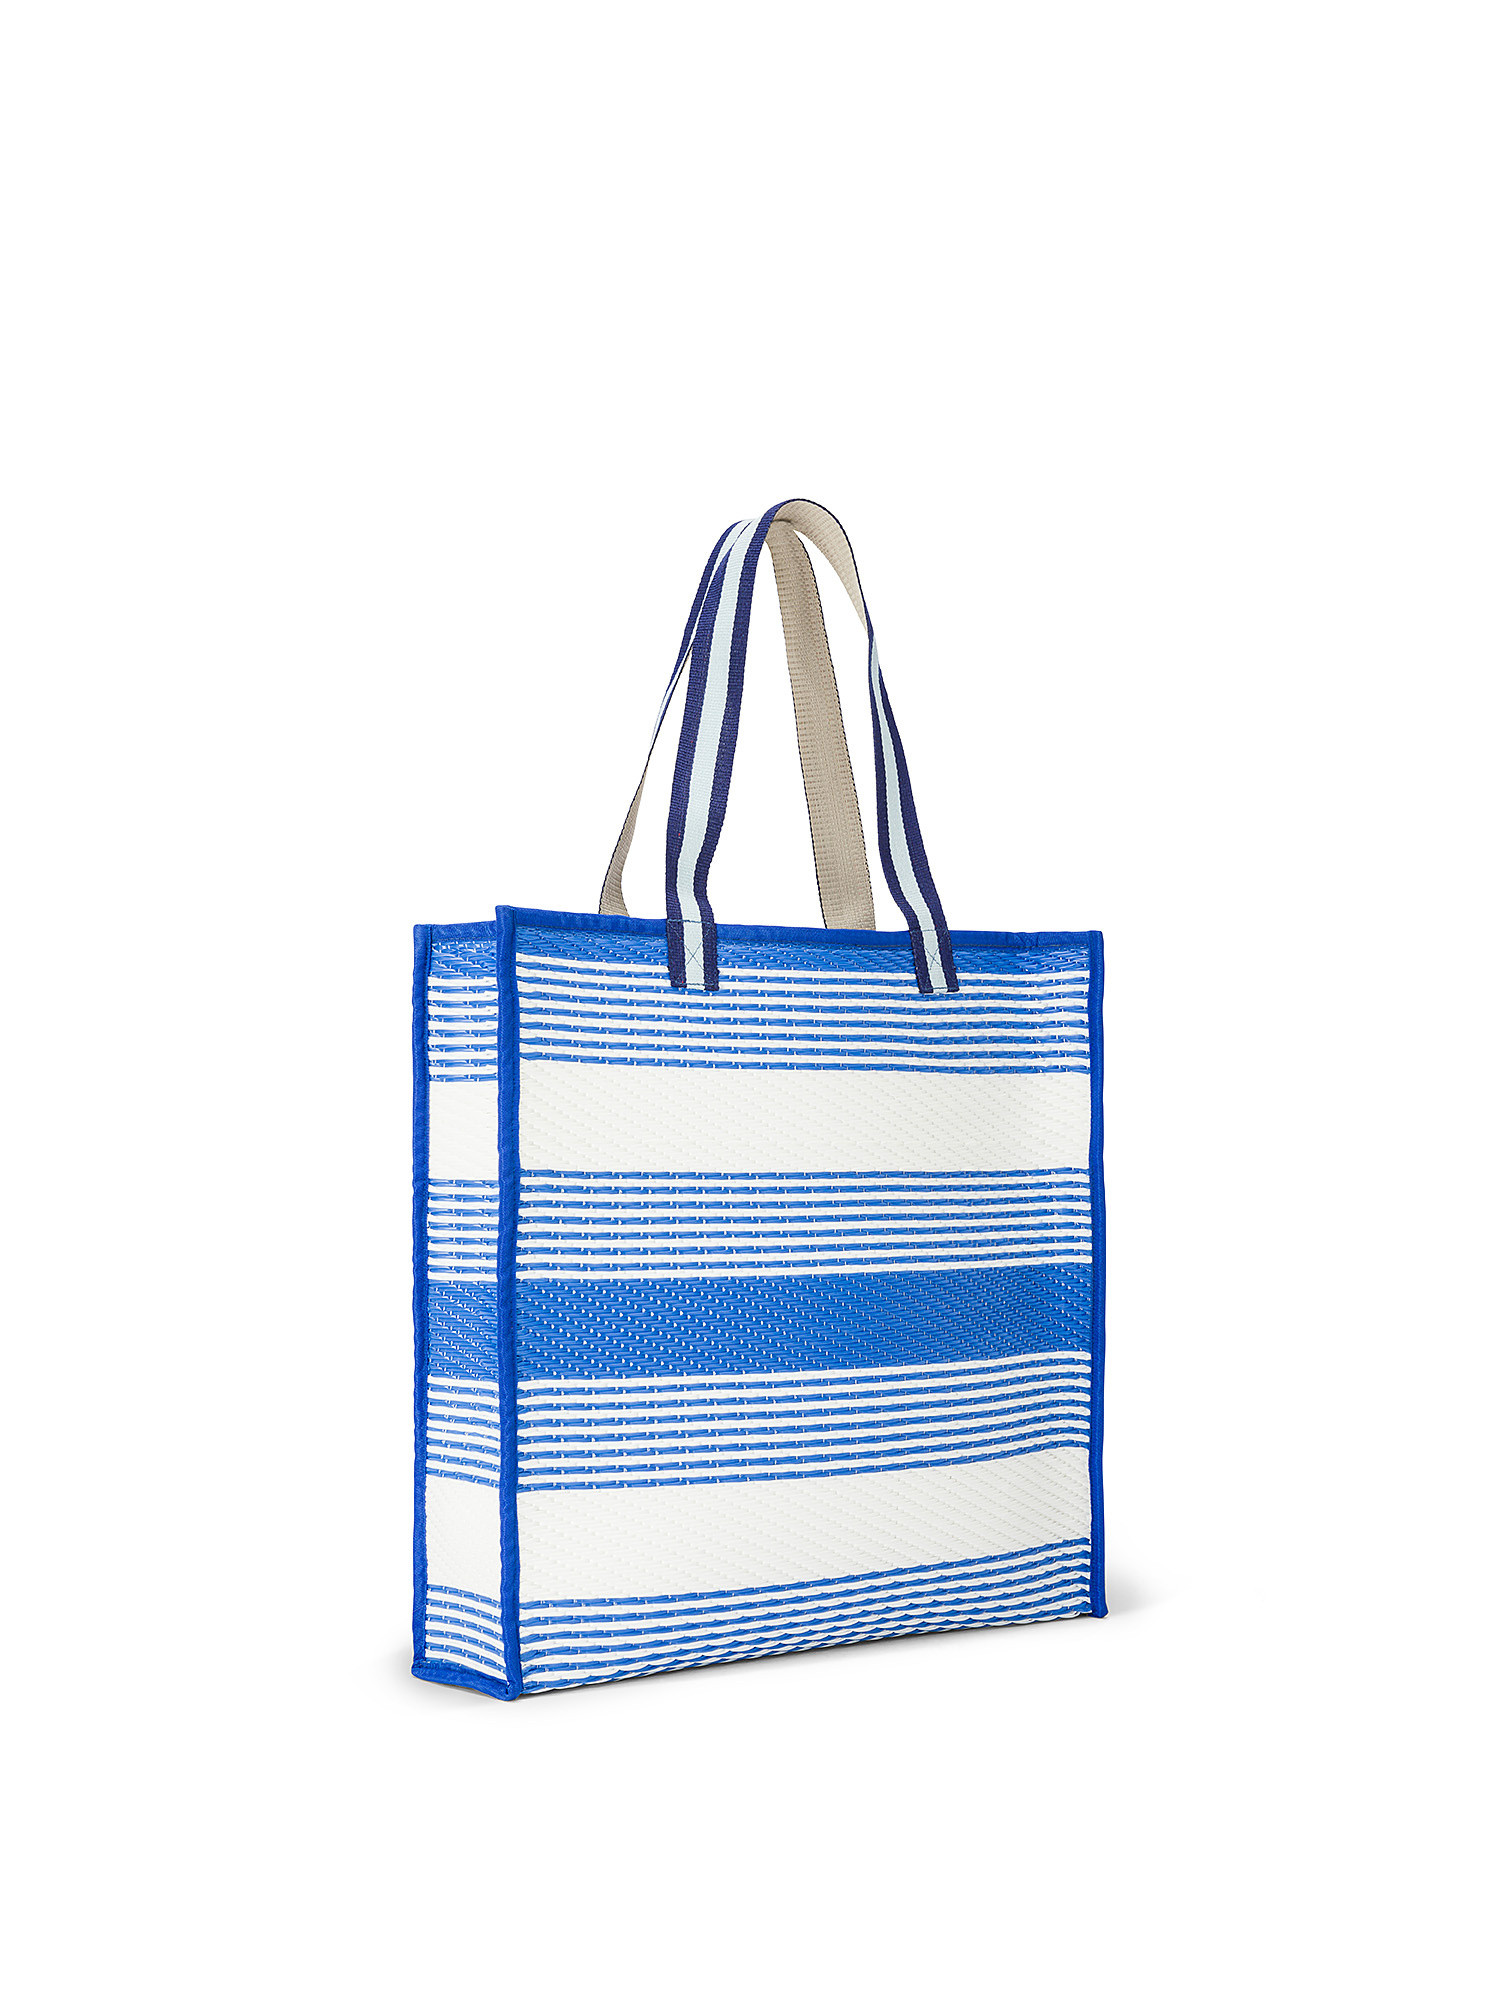 Shopper bag in recycled plastic., White / Blue, large image number 1